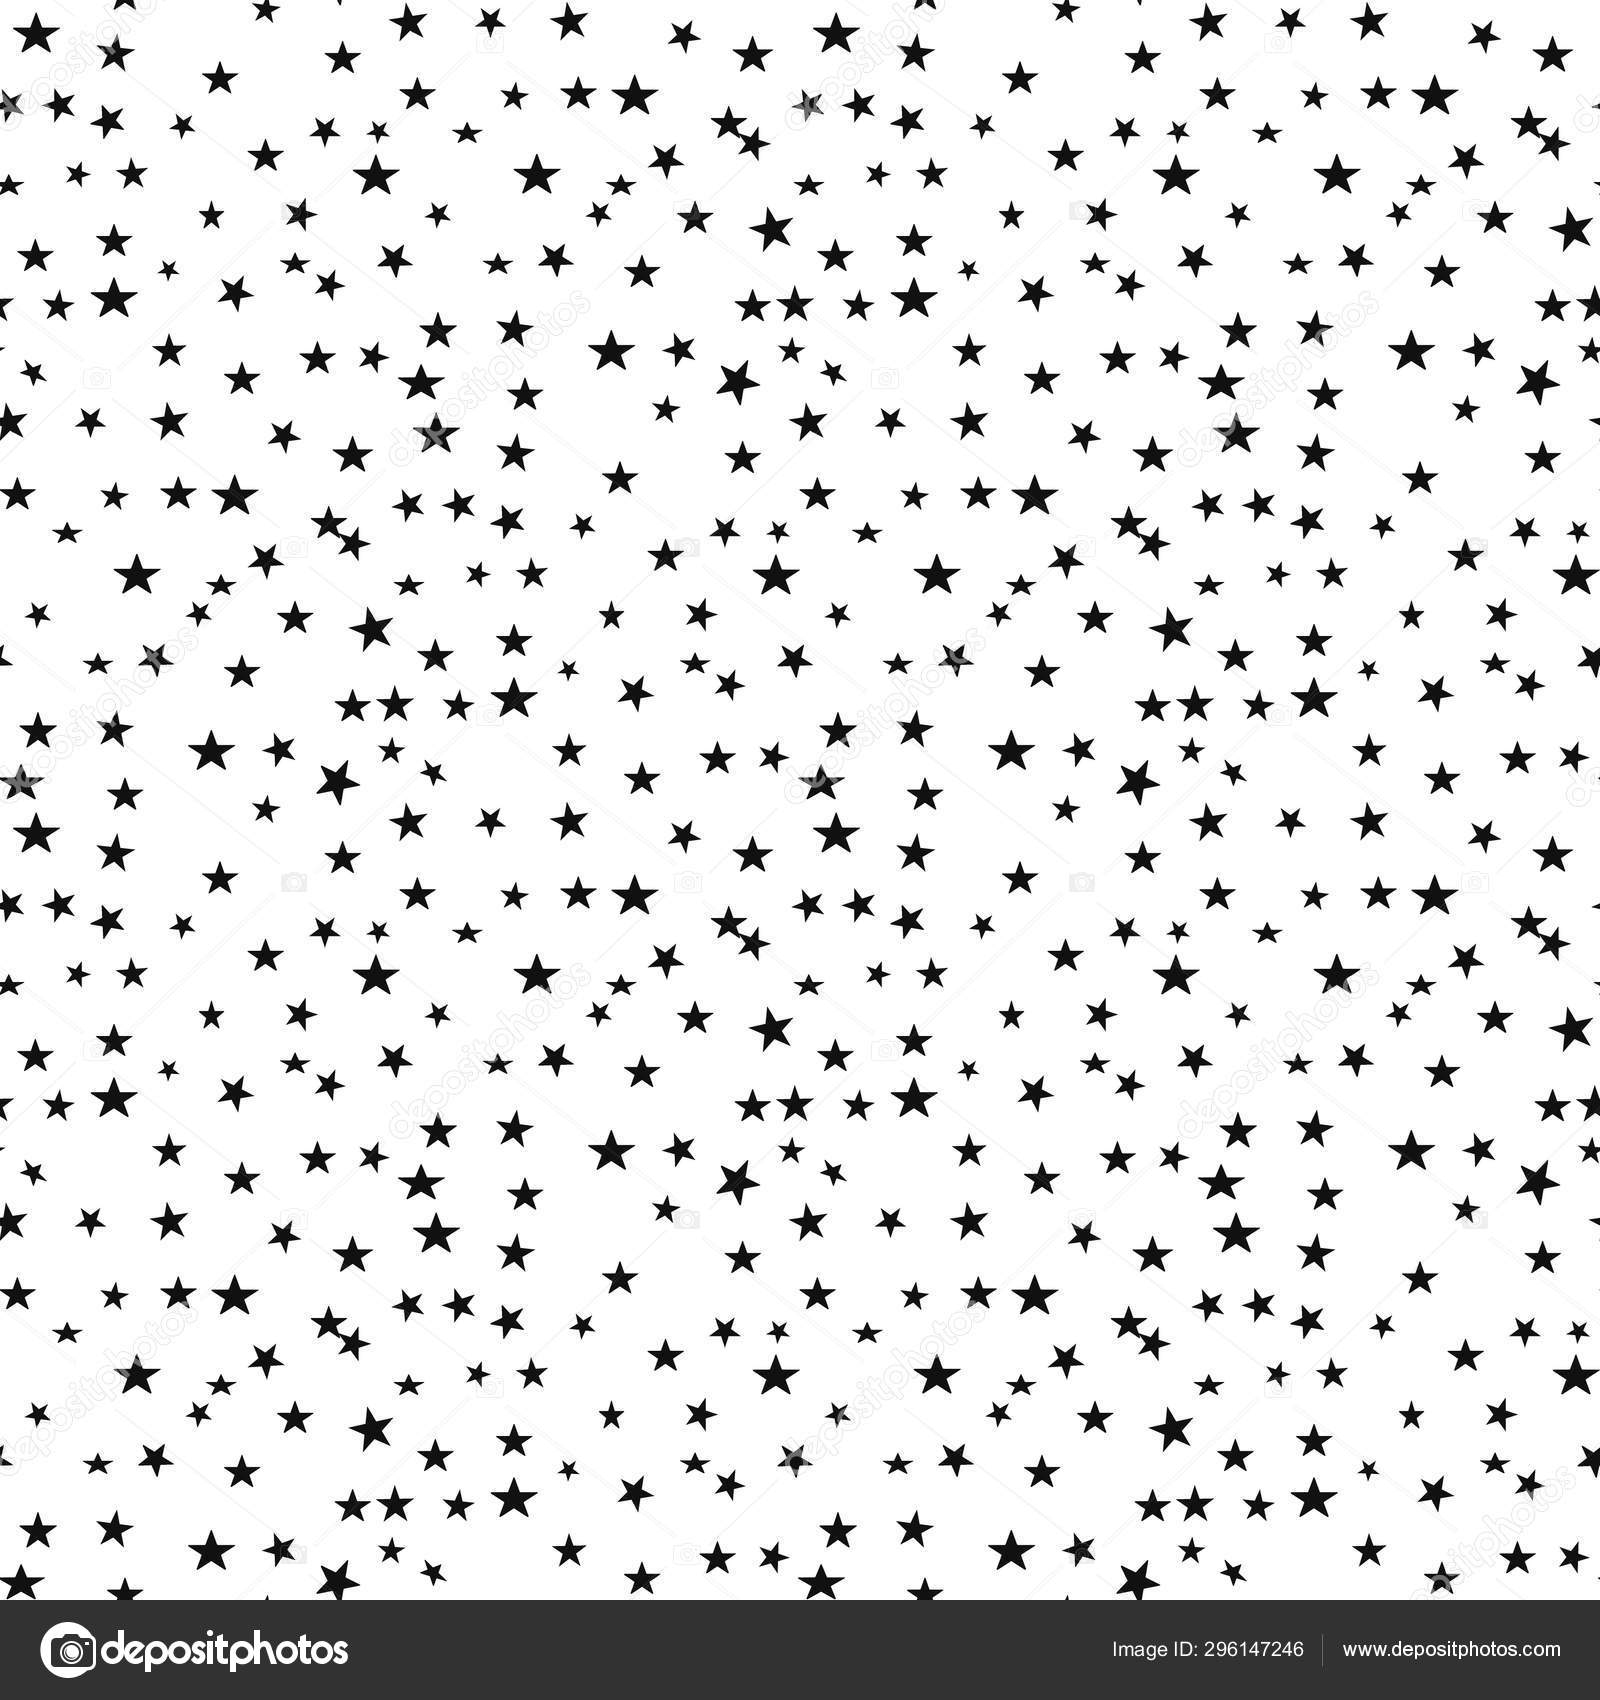 Lovely cute patterns black and white Vector Flat Space Seamless Pattern Background Cute Color Template With Astronaut Spaceship Rocket Moon Black Hole Stars In Outer Stock Image By C Metanet88 296147246